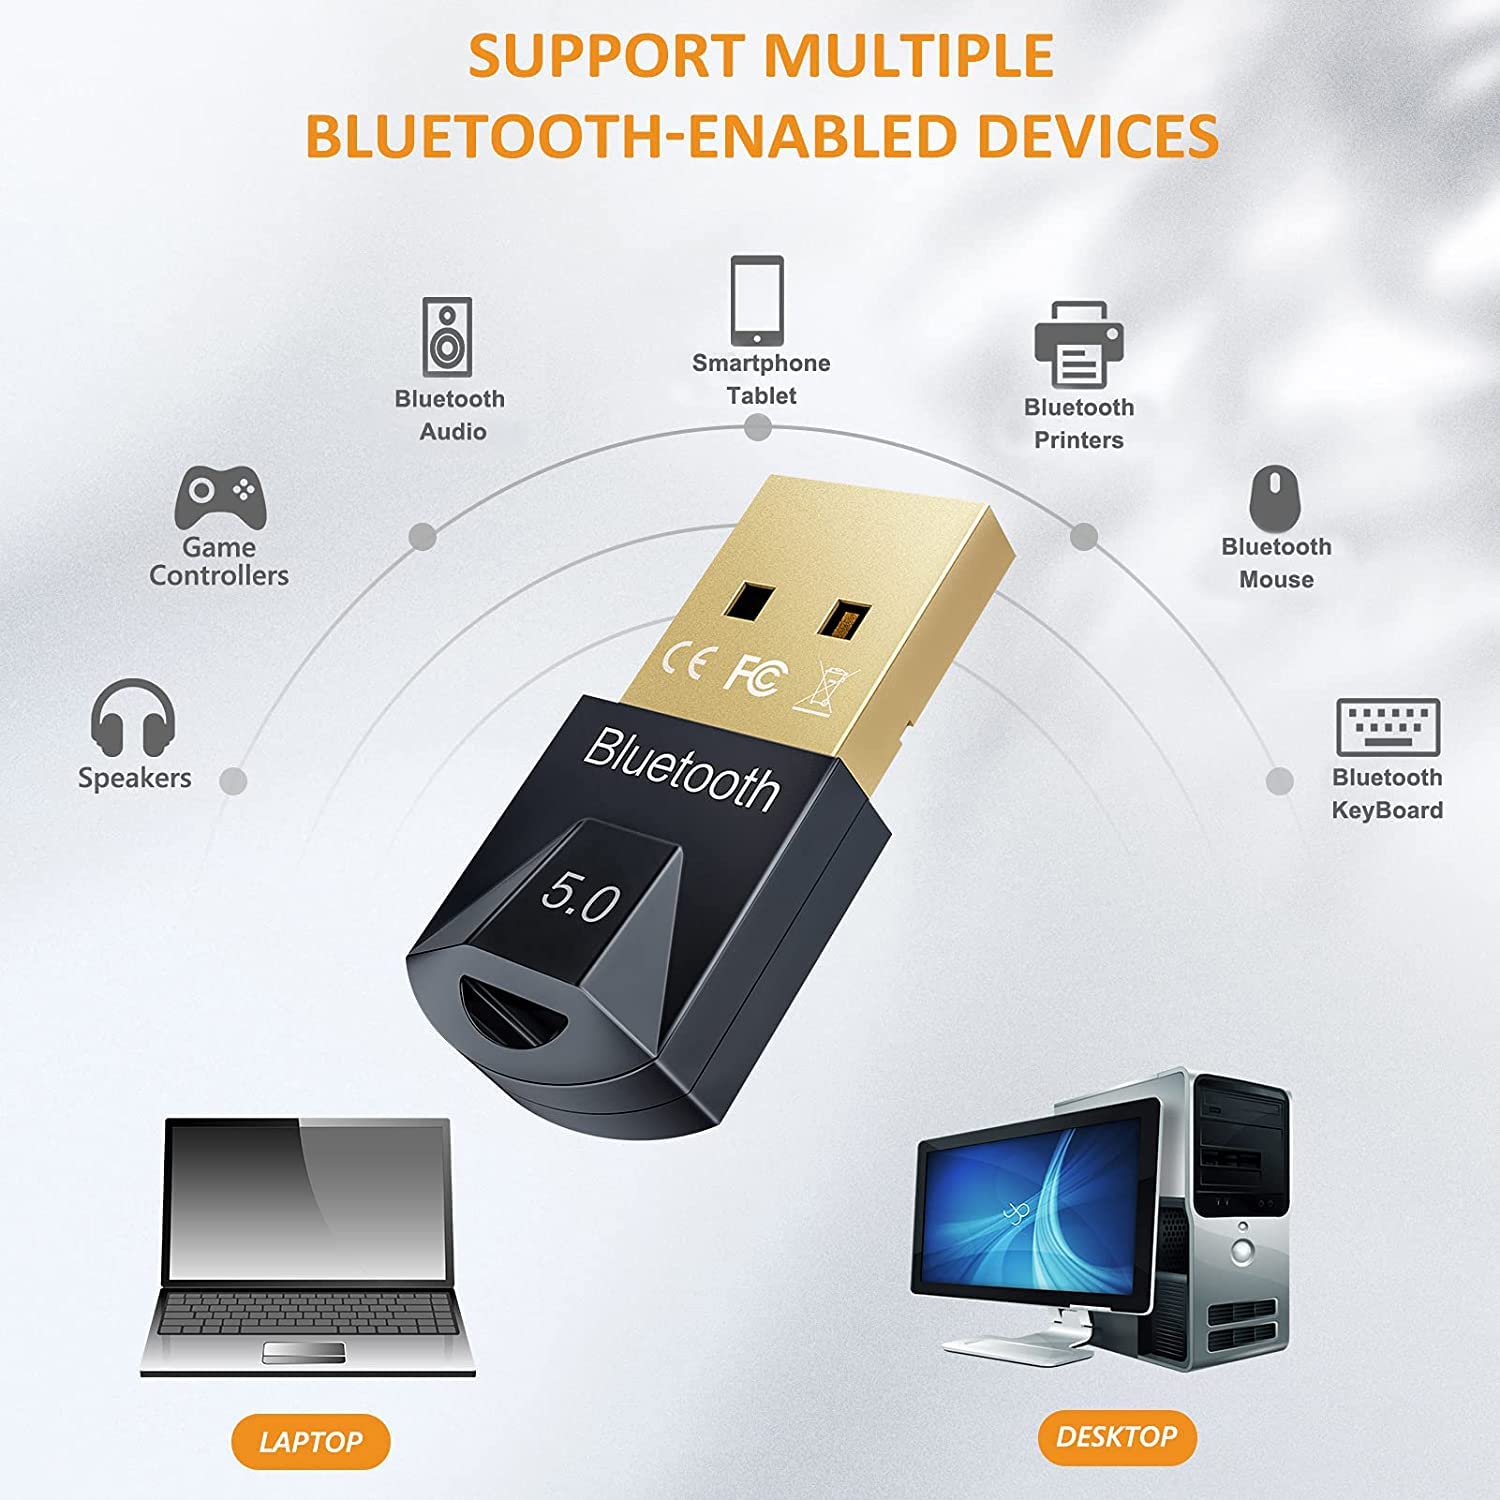 USB Bluetooth 5.0 Adapter Dongle for PC, Bluetooth Receiver for Laptop Computer Desktop, Support windows 10/8/8.1/7, Low Latency Wireless Transfer for Headset Speaker Keyboard Mouse Printer